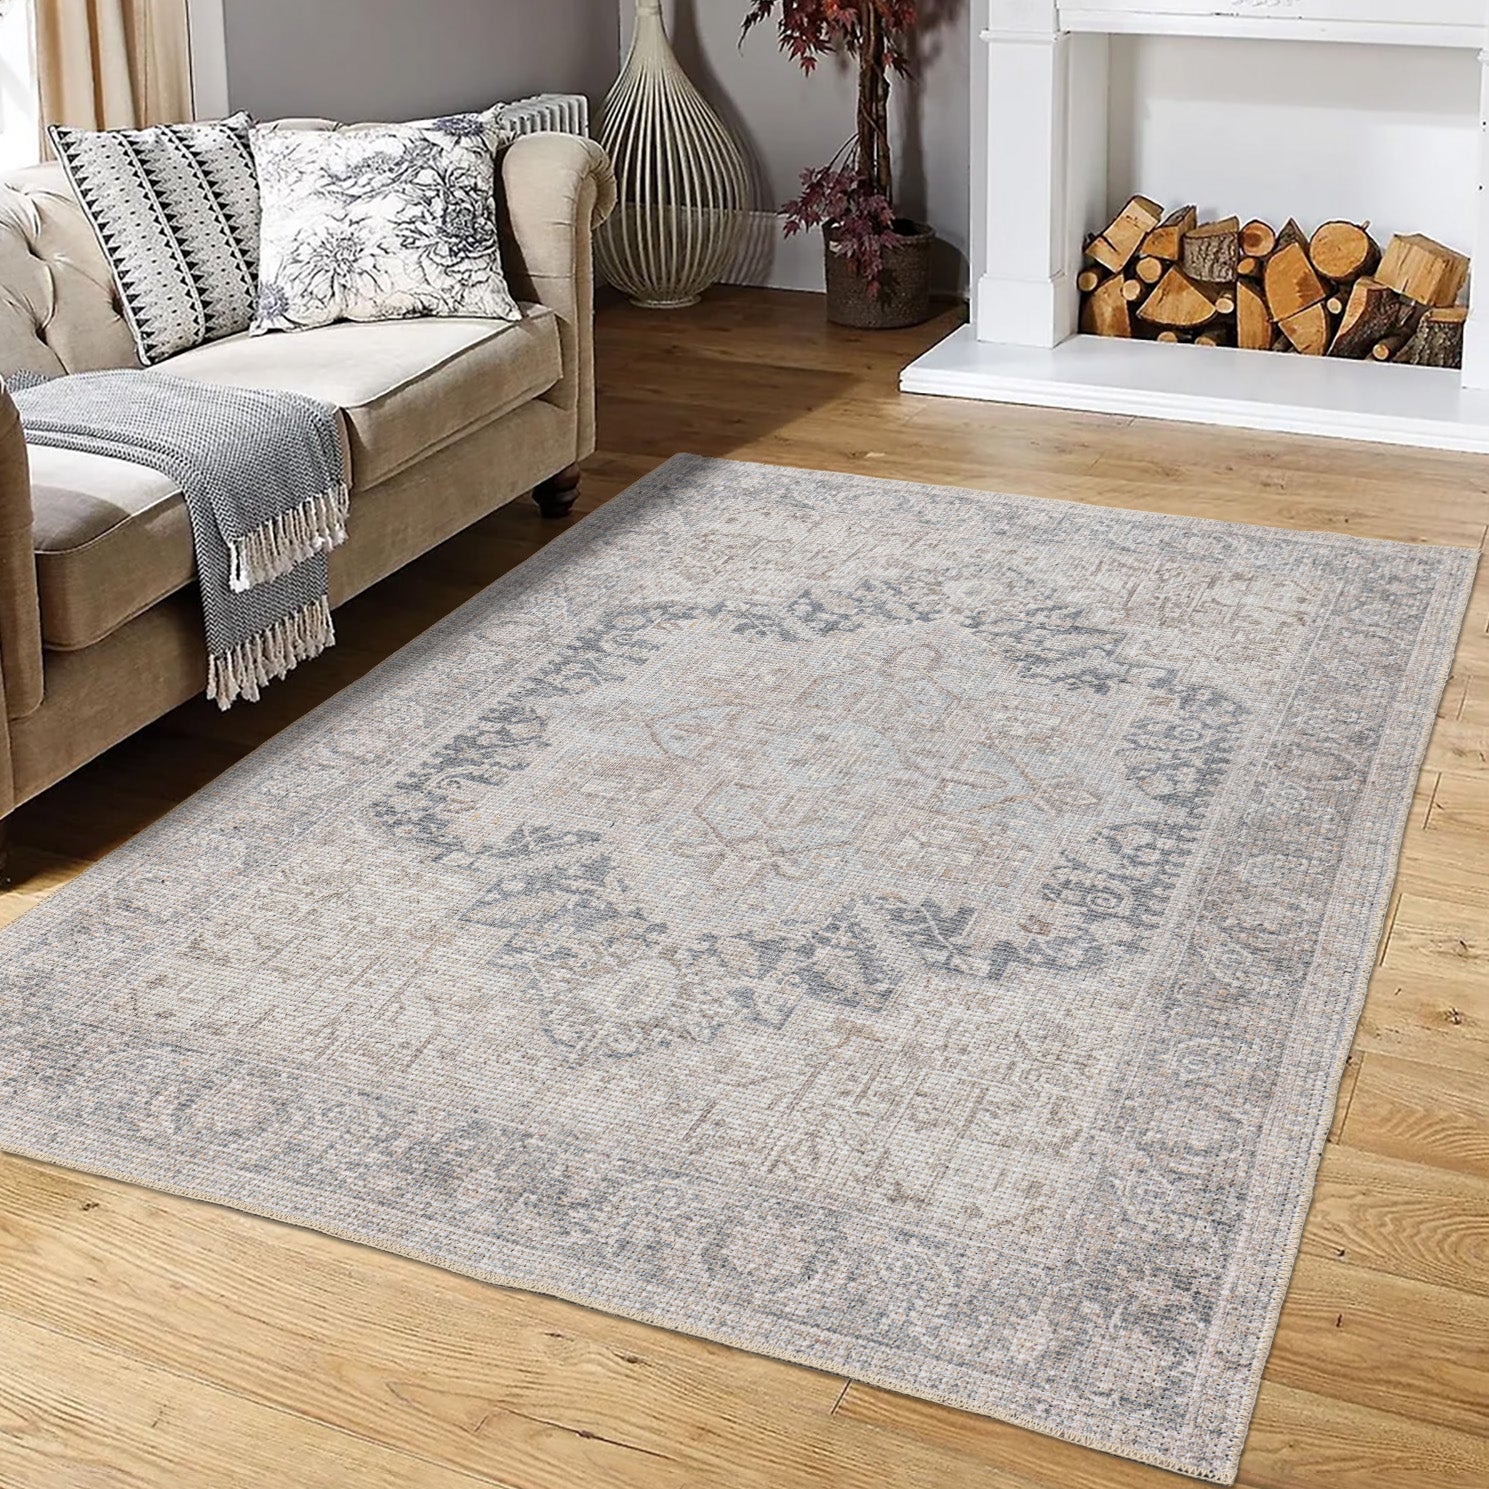 grey blue medallion cotton and polyster machine washable traditional rustic area rug 5x7, 5x8 ft Contemporary, Living Room Carpet, Bedroom, Home Office